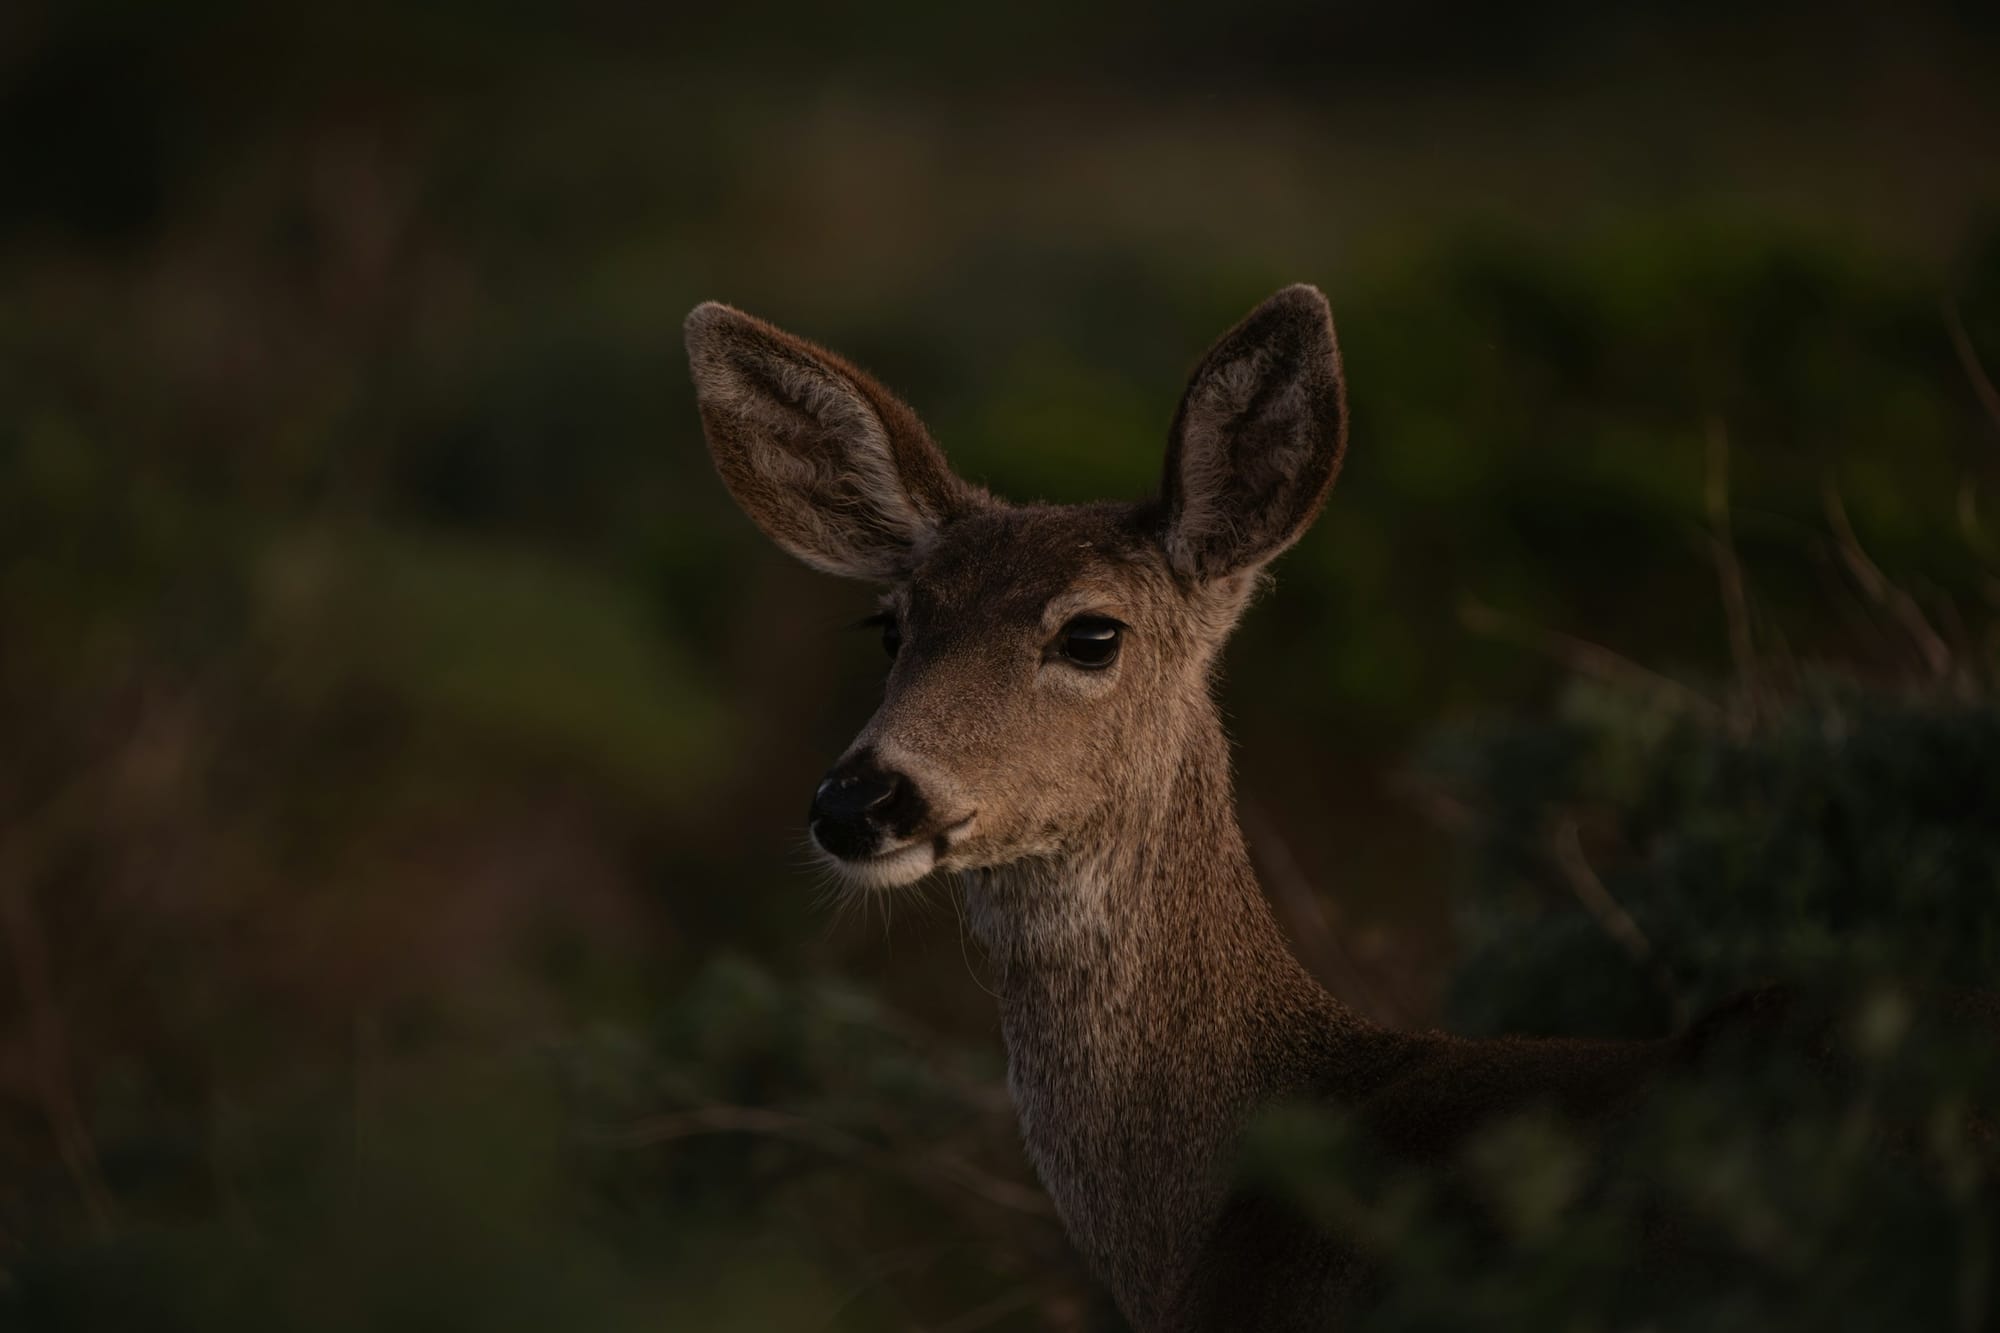 A deer's face in the early morning or late evening light